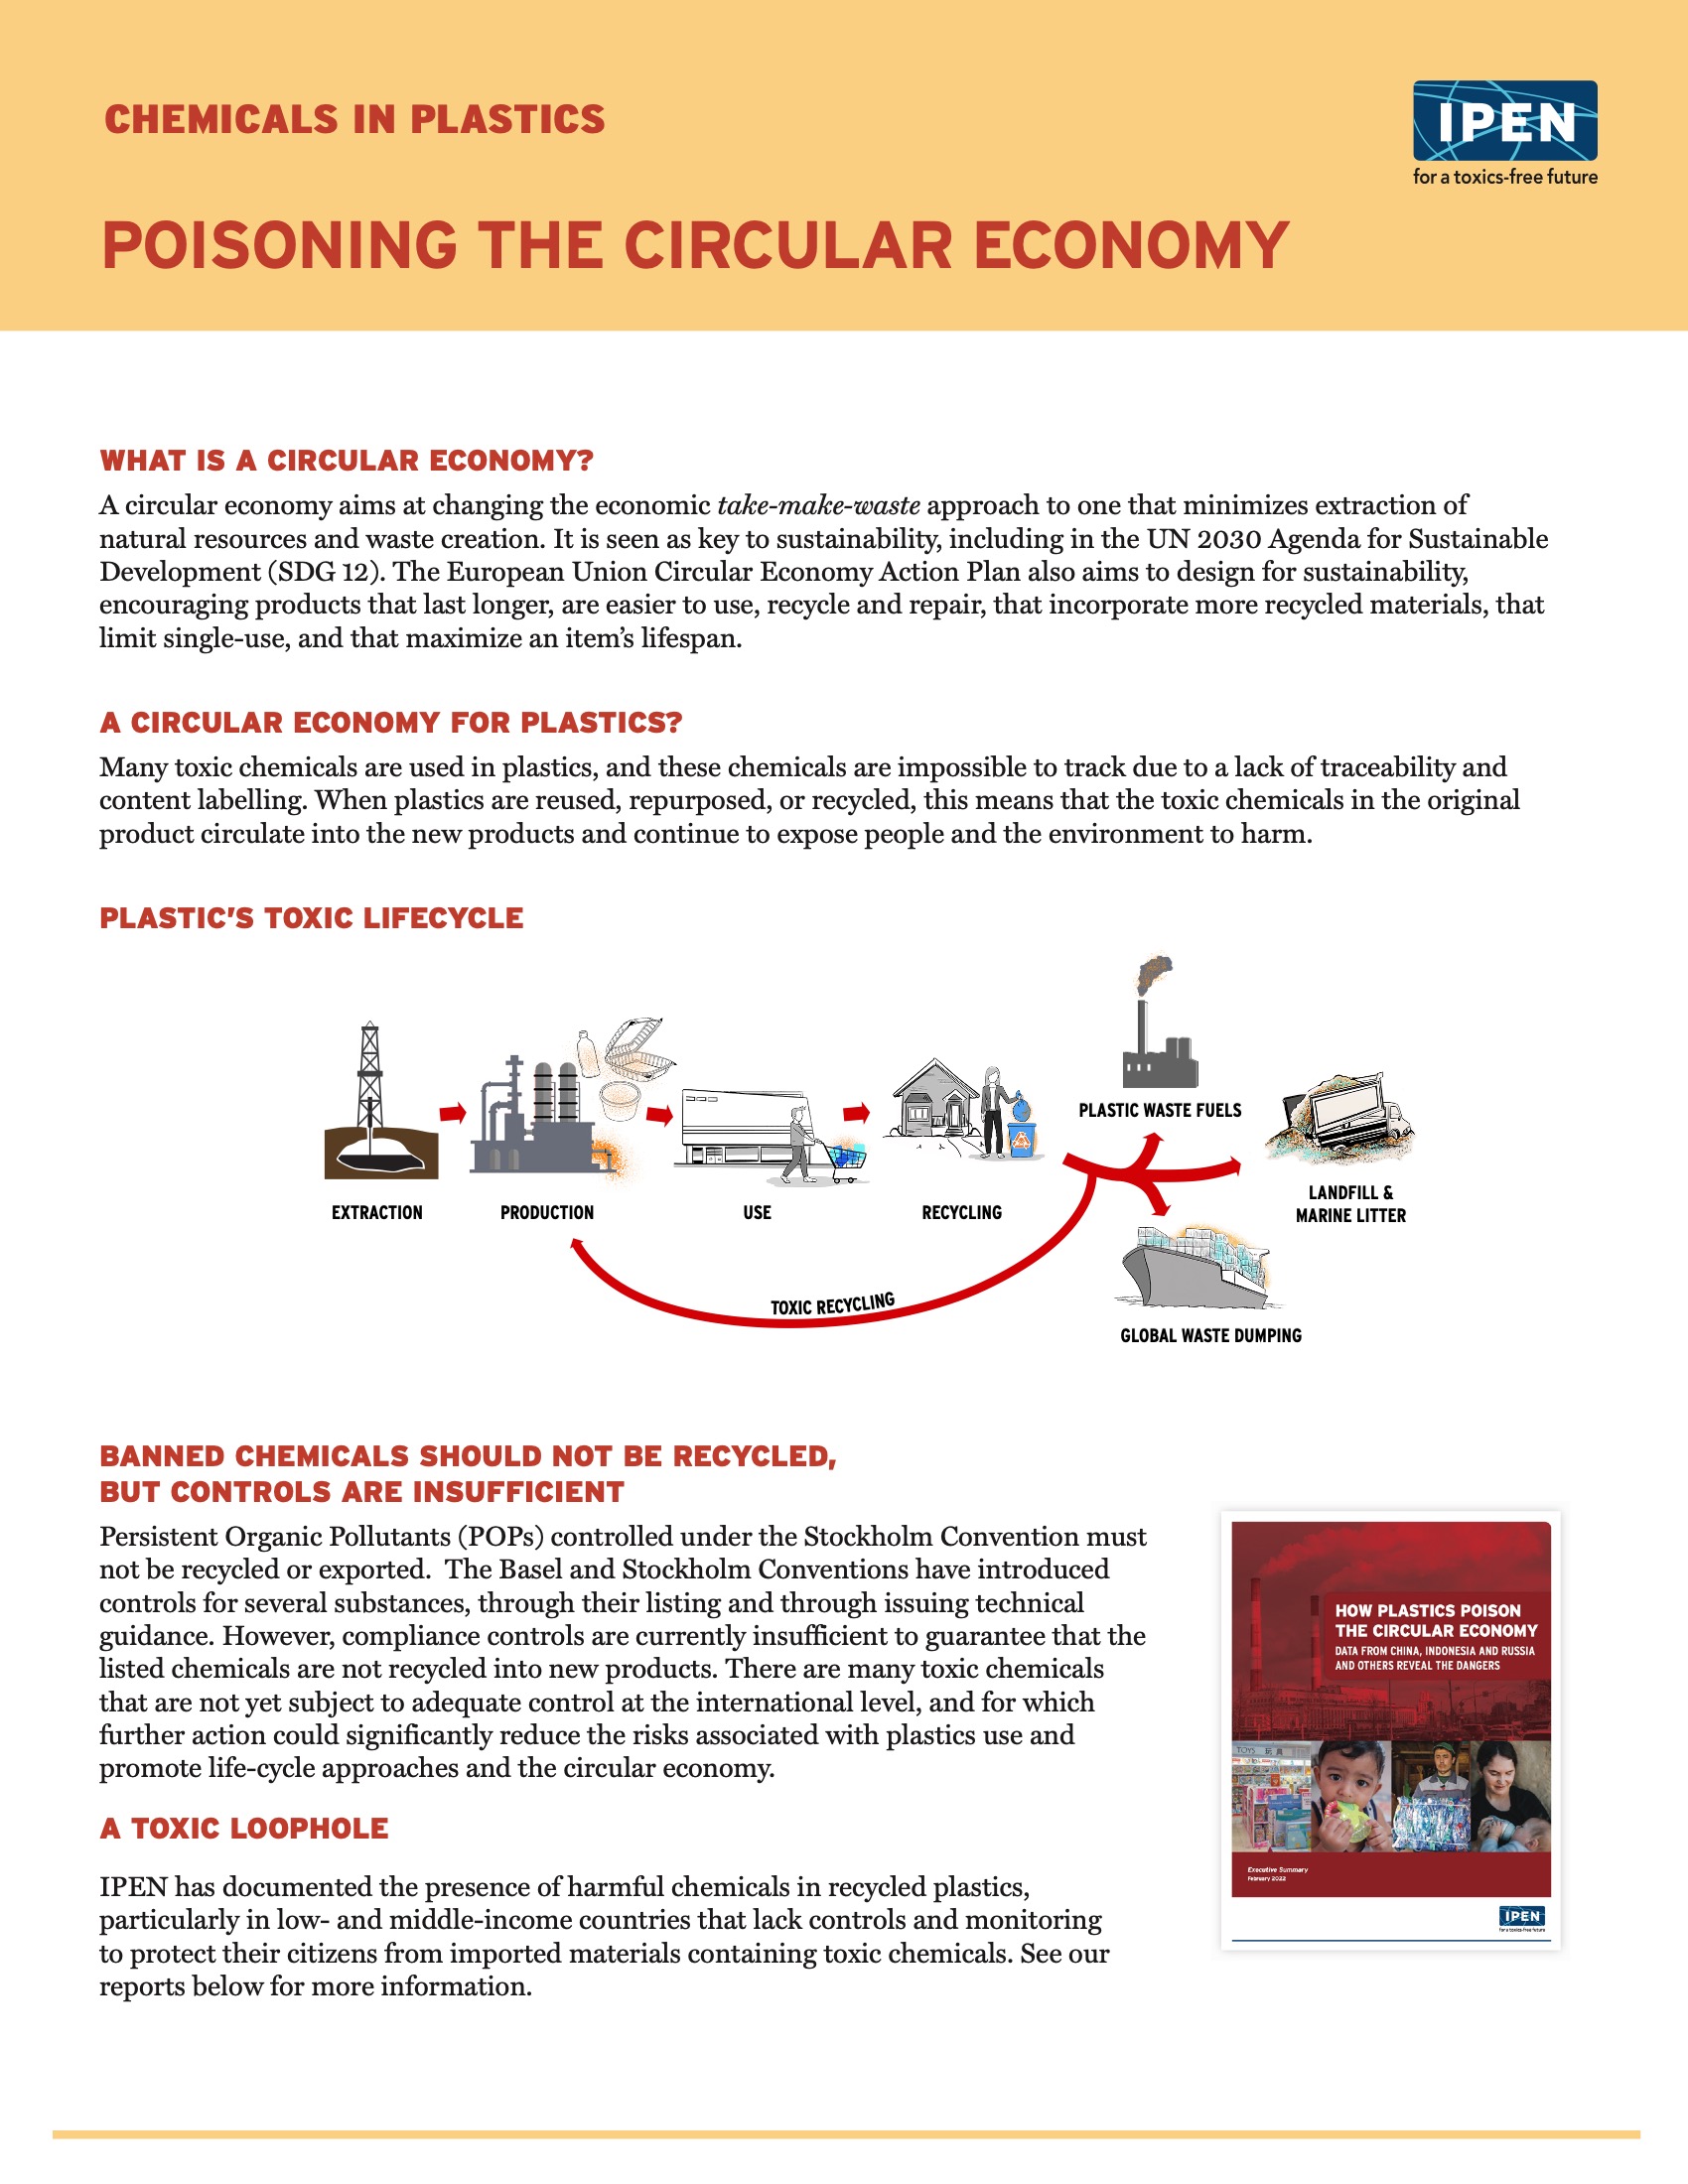 Cover of Chemicals in Plastics: Poisoning the Circular Economy